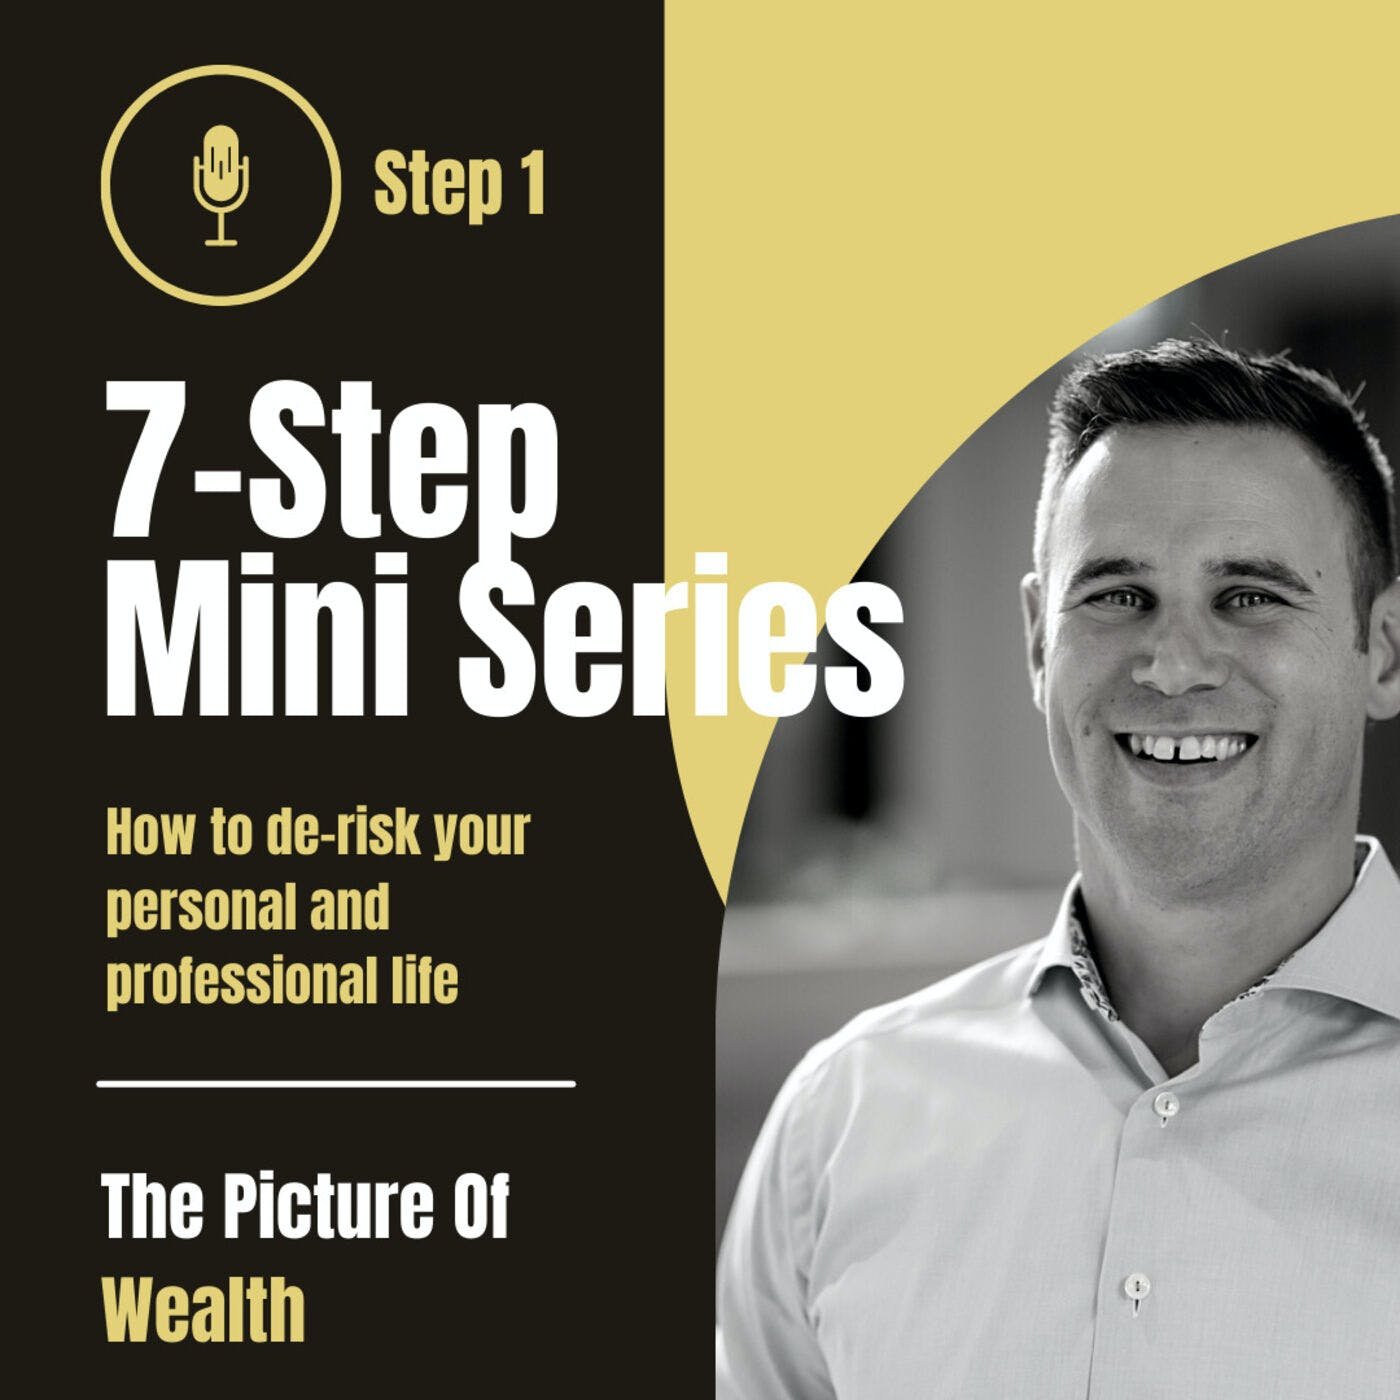 How Having a Plan Will Make You Richer (The Wealth Pyramid)